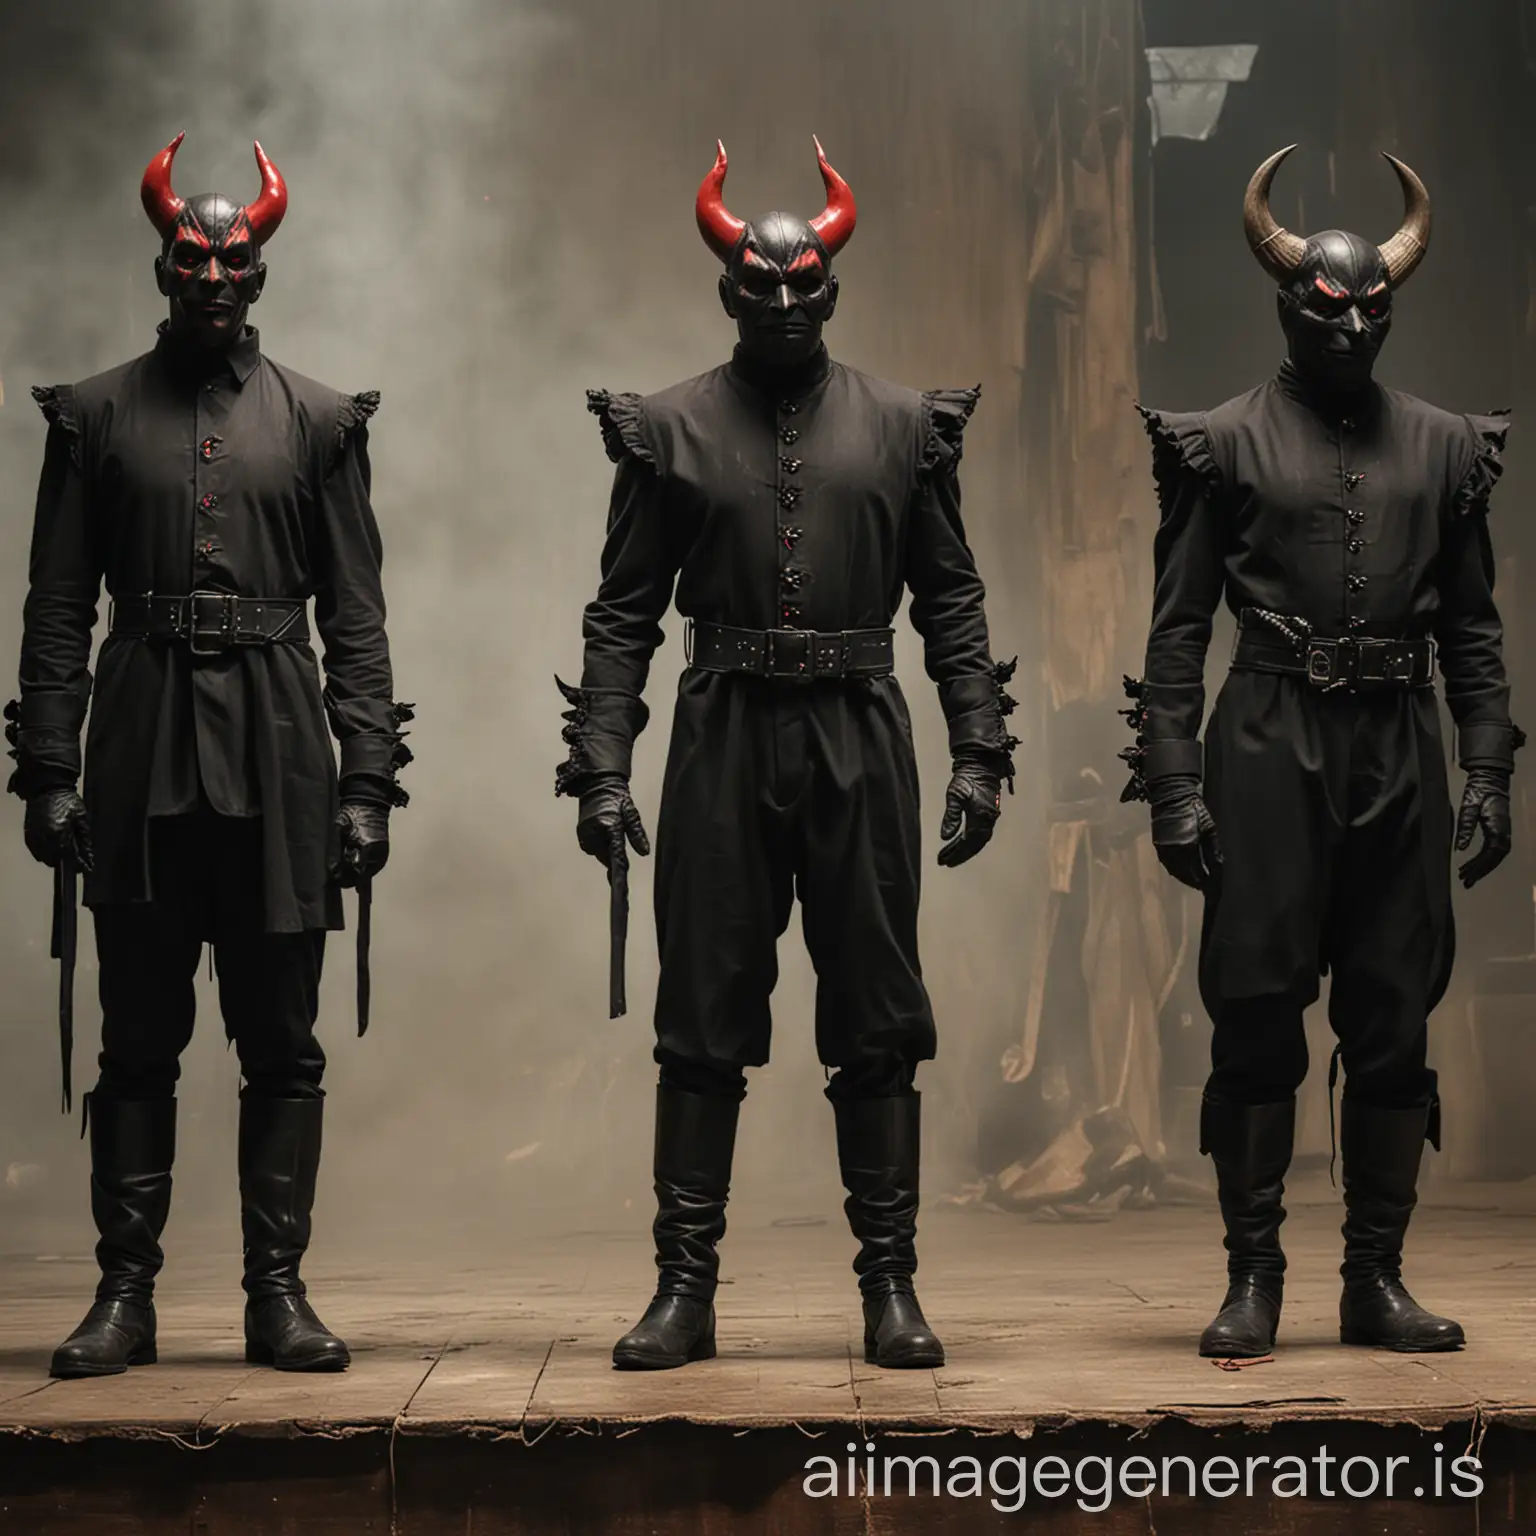 Tall-Man-in-Elegant-Black-Attire-with-Red-Devil-Mask-and-Bodyguards-on-Stage